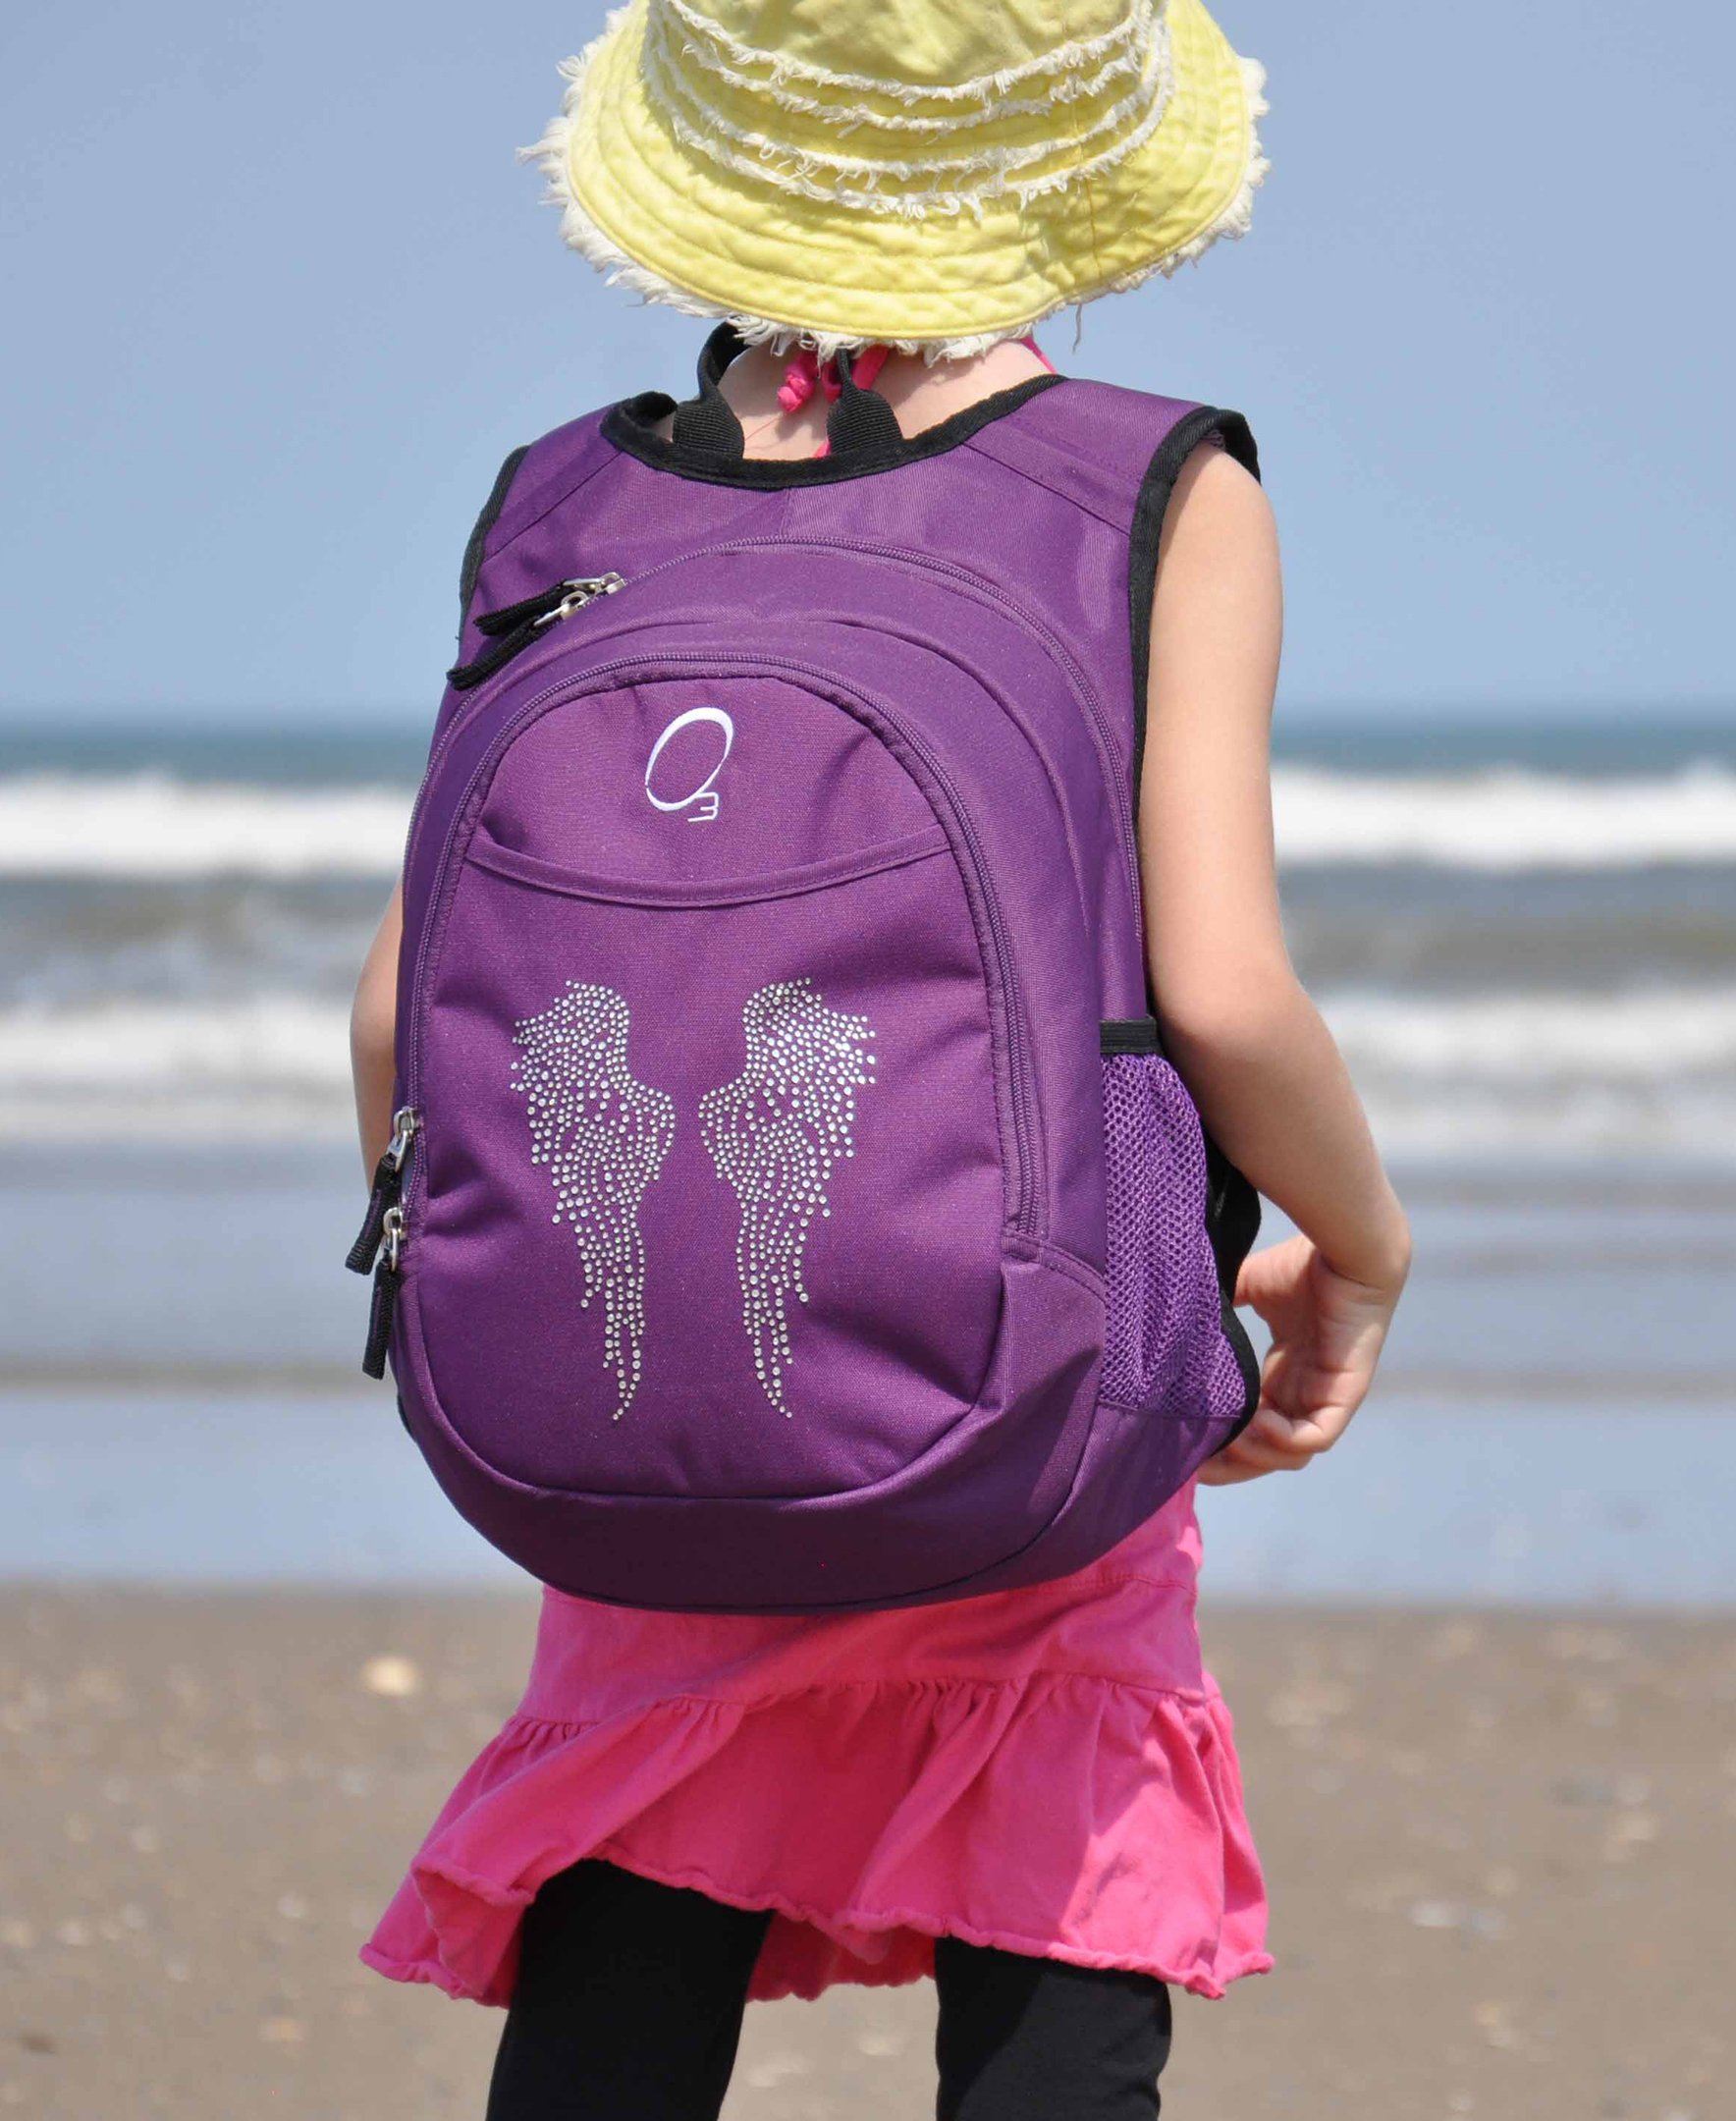 O3KCBP001 Obersee Mini Preschool All-in-One Backpack for Toddlers and Kids with integrated Insulated Cooler | Rhinestone Angel Wings - image 5 of 6